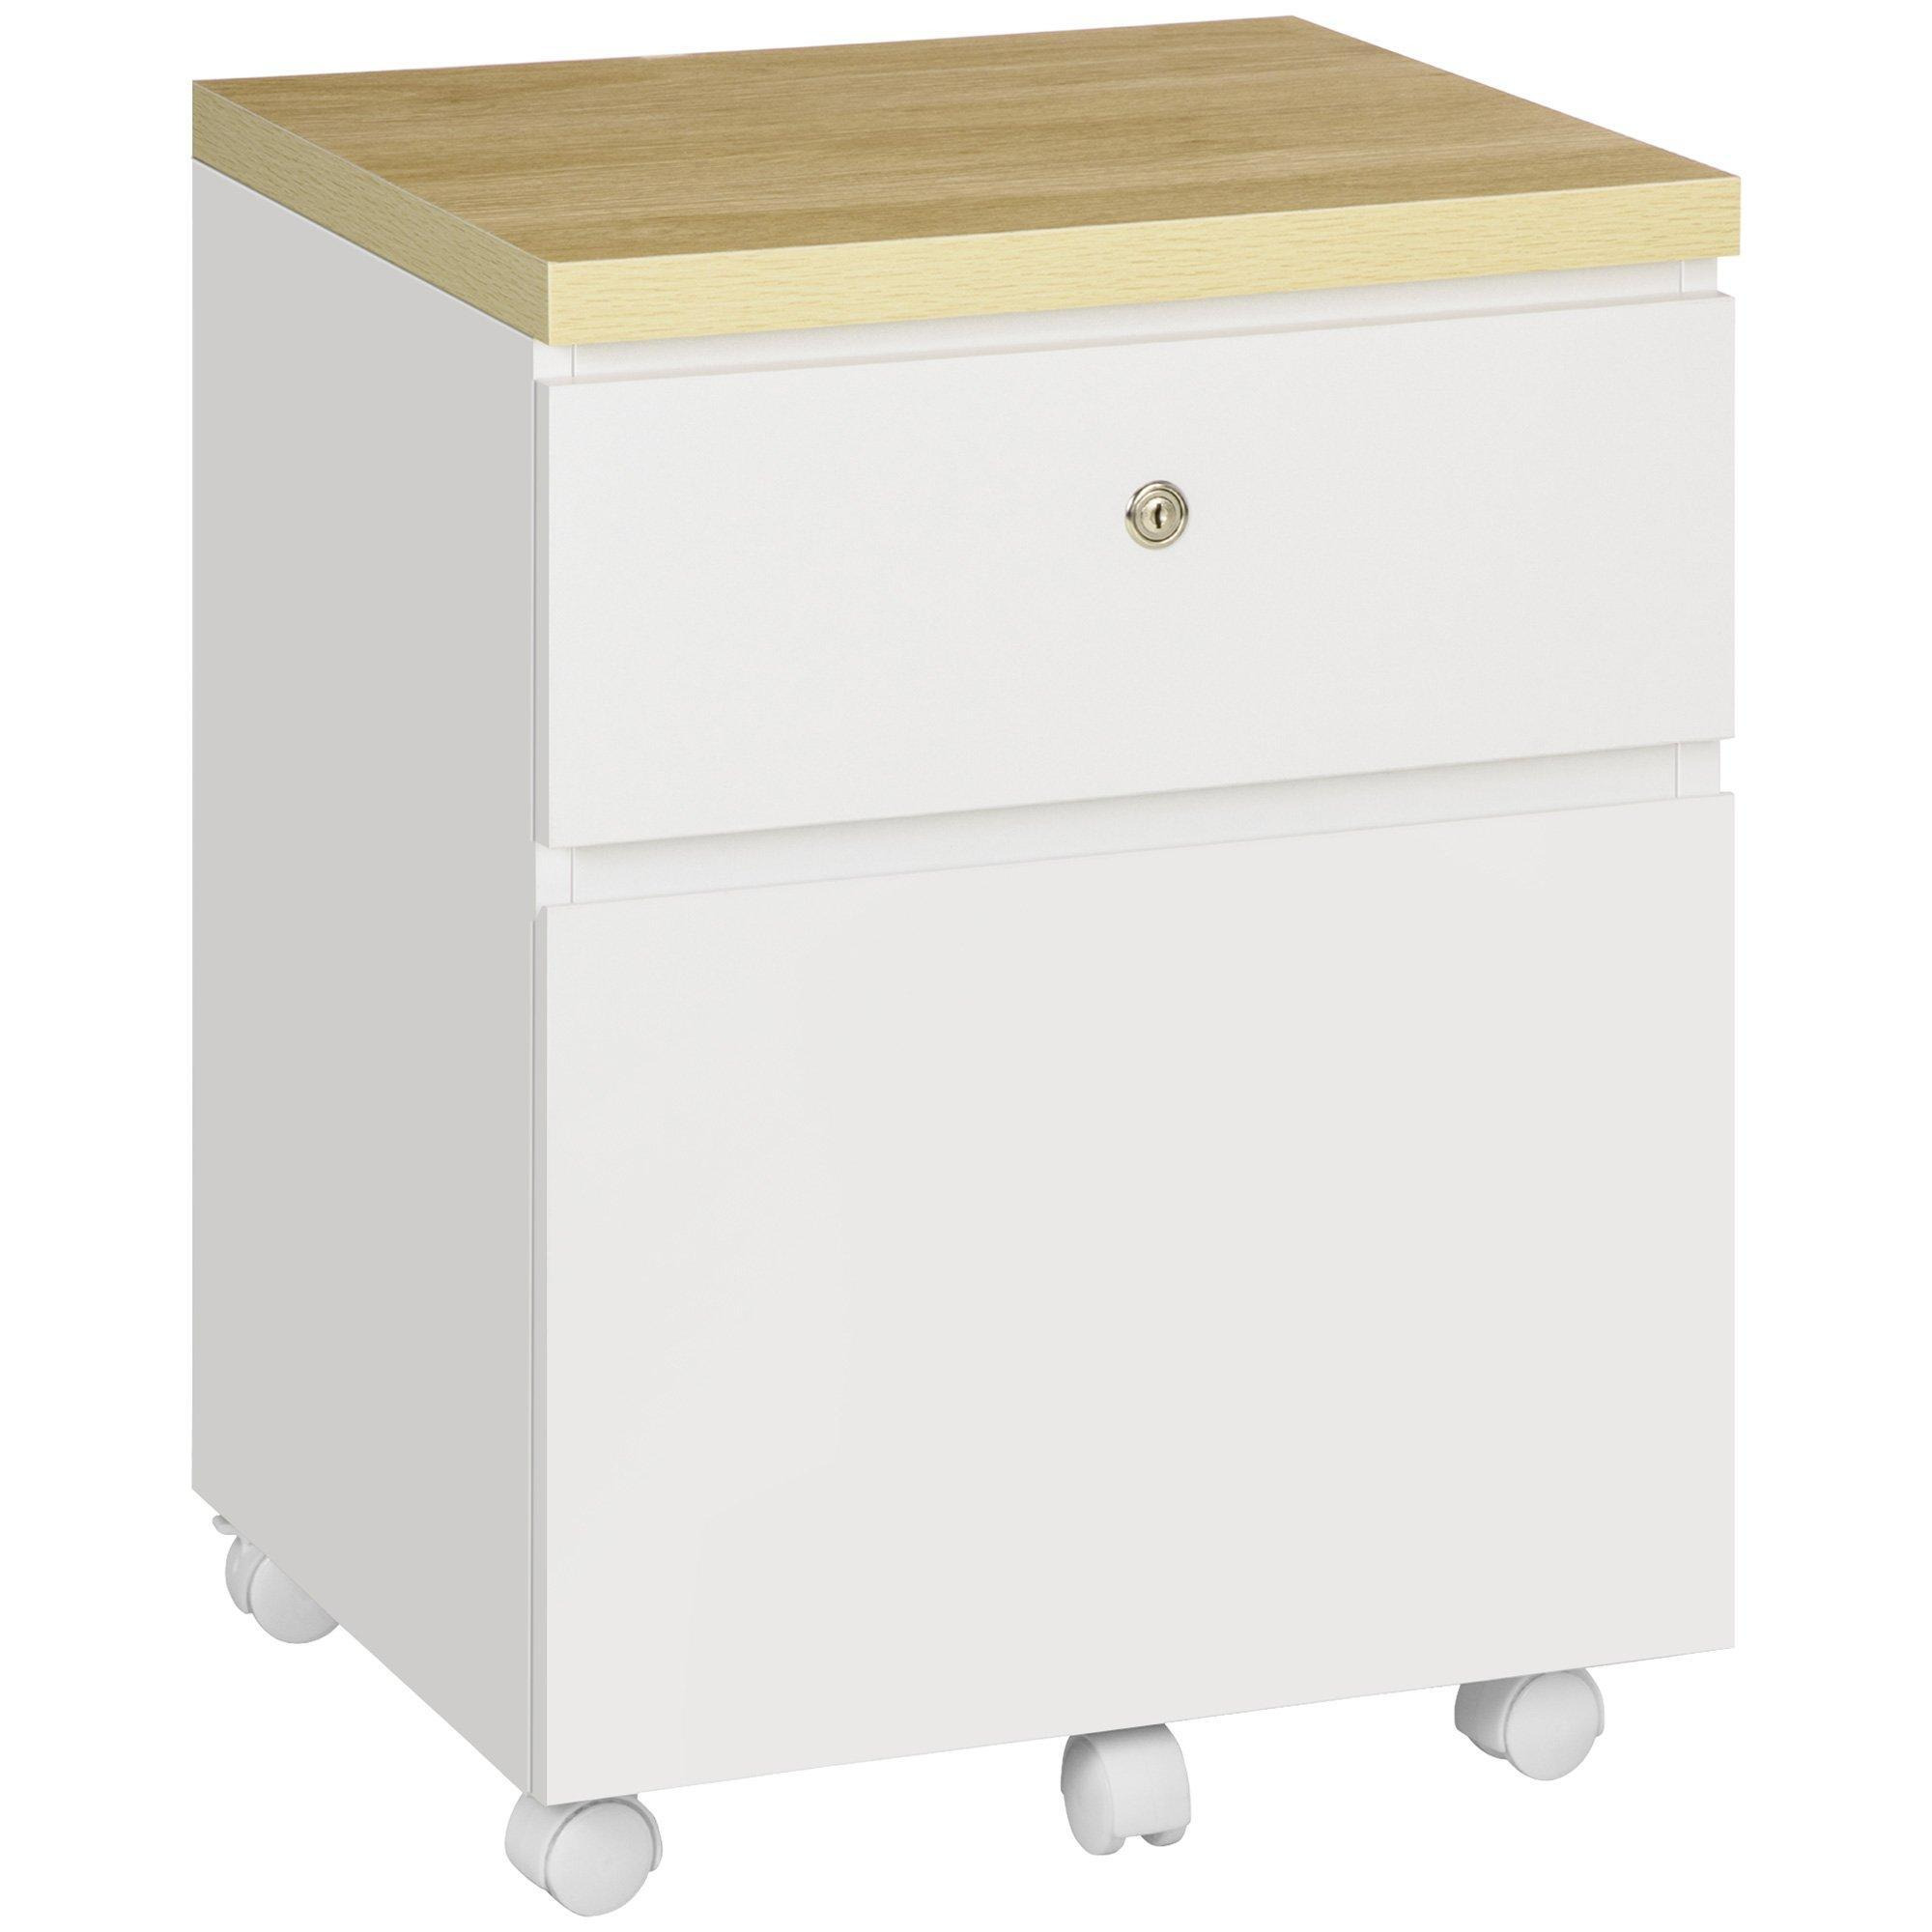 2-Drawer Filing Cabinet Mobile File Cabinet Legal Size with Lock Wheels - image 1